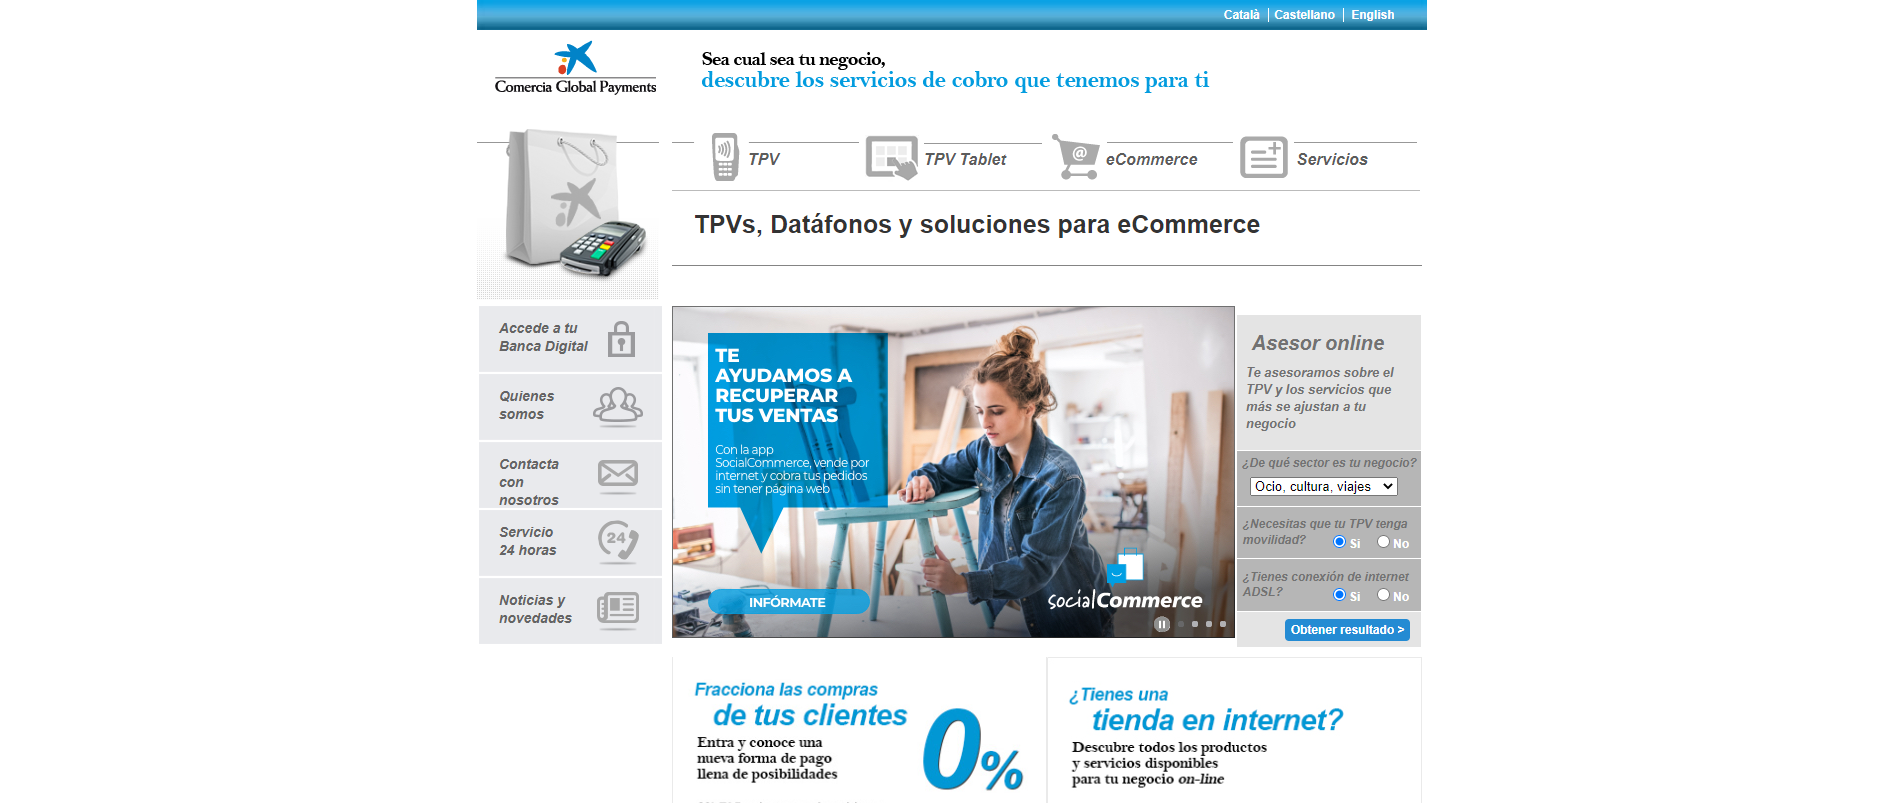 Comercia Global Payments